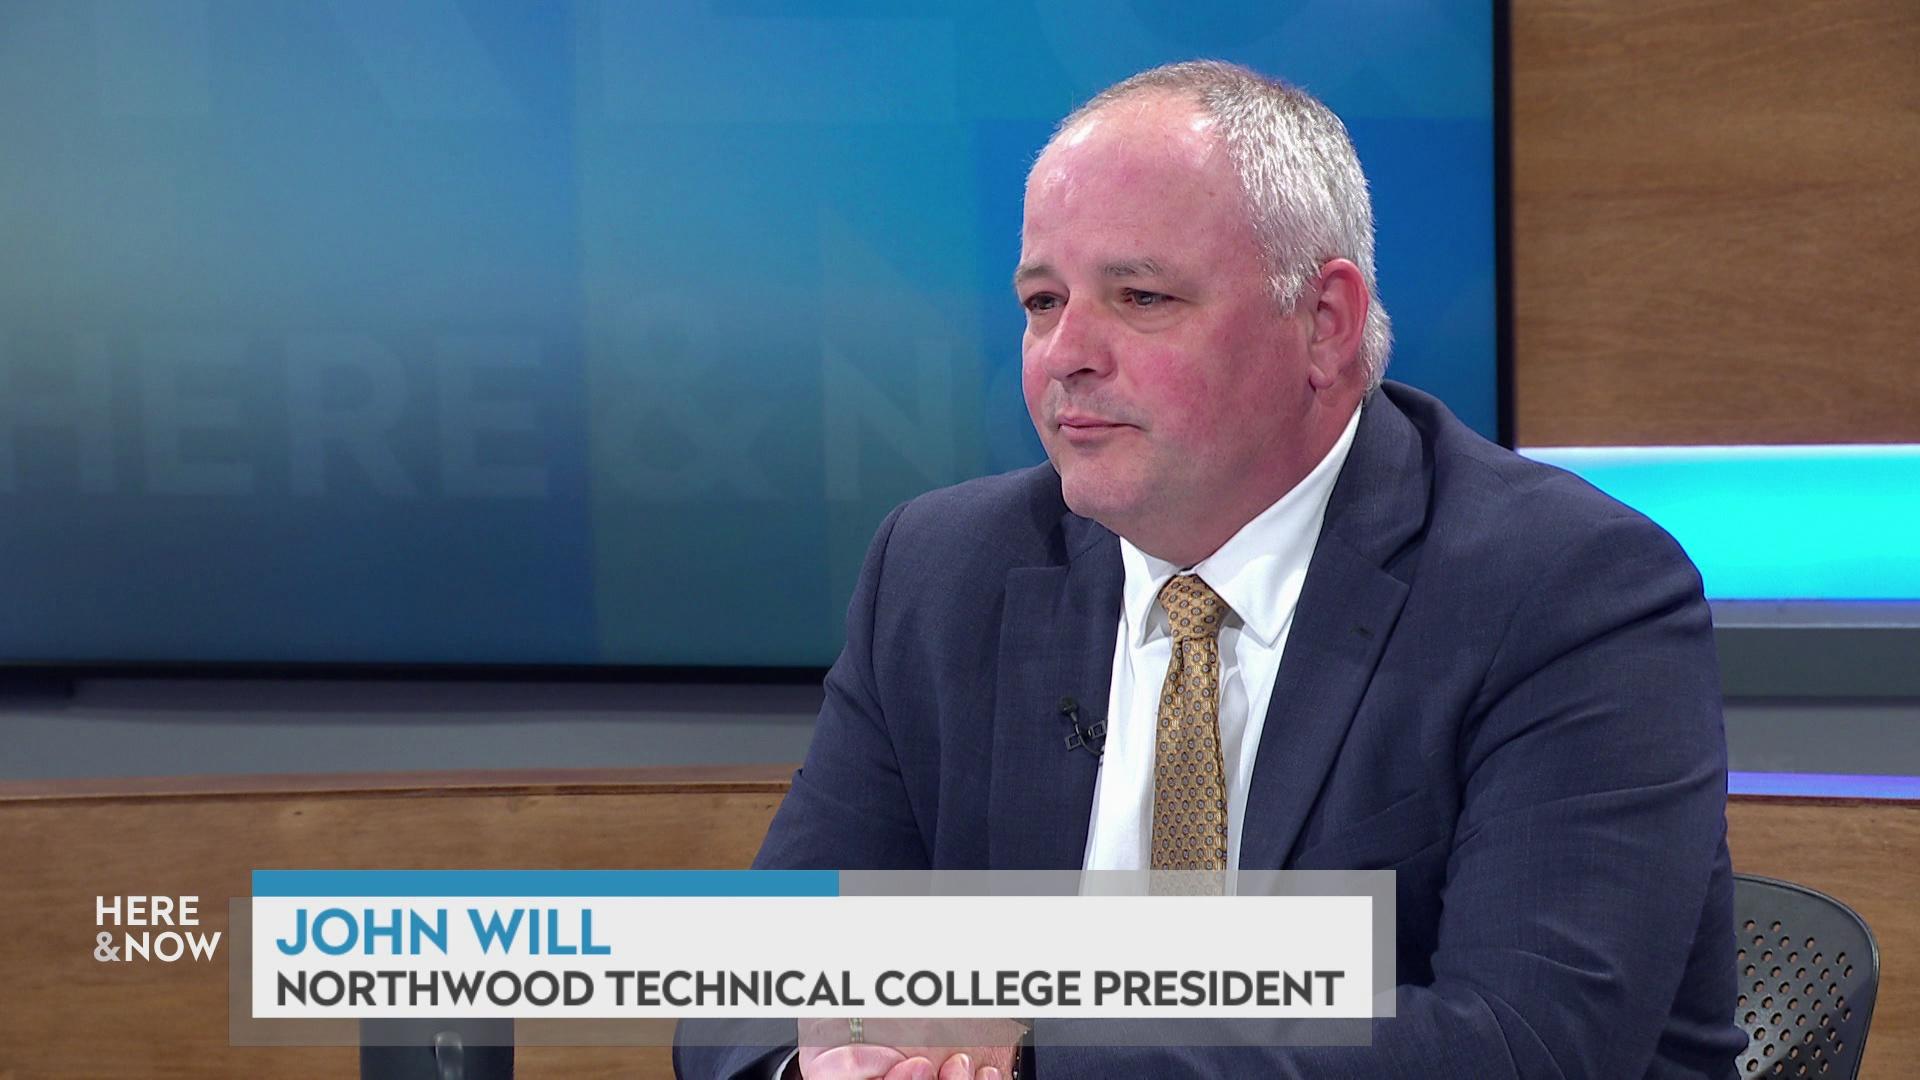 A still image shows John Will seated at the 'Here & Now' set featuring wood paneling, with a graphic at bottom reading 'John Will' and 'Northwood Technical College President.'